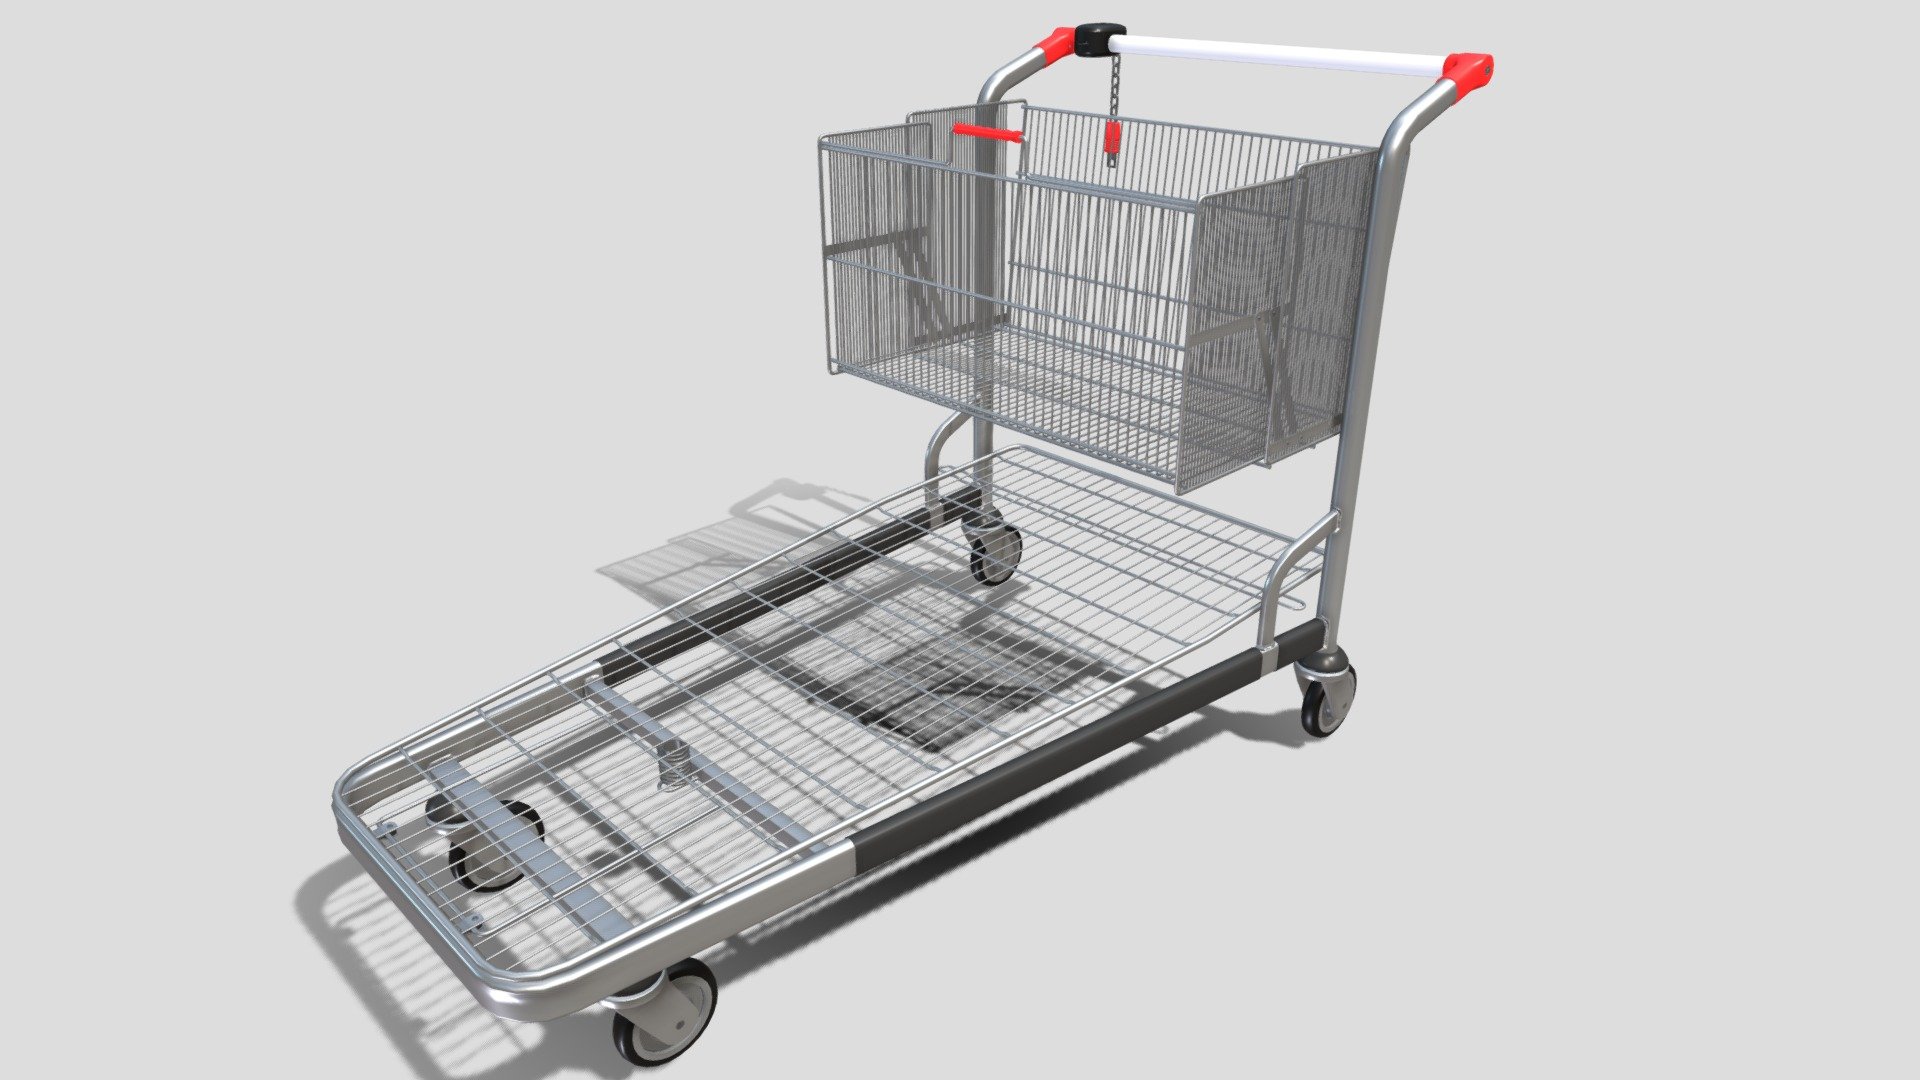 Shopping cart 3d model rendered with Cycles in Blender, as per seen on attached images. 
The model is scaled to real-life scale.

File formats:
-.blend, rendered with cycles, as seen in the images;
-.obj, with materials applied;
-.dae, with materials applied;
-.fbx, with material slots applied;
-.stl;

Two sets of files are provided, one with the basket open and one with it closed.
Files come named appropriately and split by file format.

3D Software:
The 3D model was originally created in Blender 2.8 and rendered with Cycles.

Materials and textures:
PBR material is being used, consisting of five 4k image textures (Base/Disp/Metallic/Normal/Roughness). 
Certain 3d softwares can possibly need texture re-assigning in order to get the proper material effect.

Preview scenes:
elements are on a different layer from the actual model for easier manipulation of objects 3d model